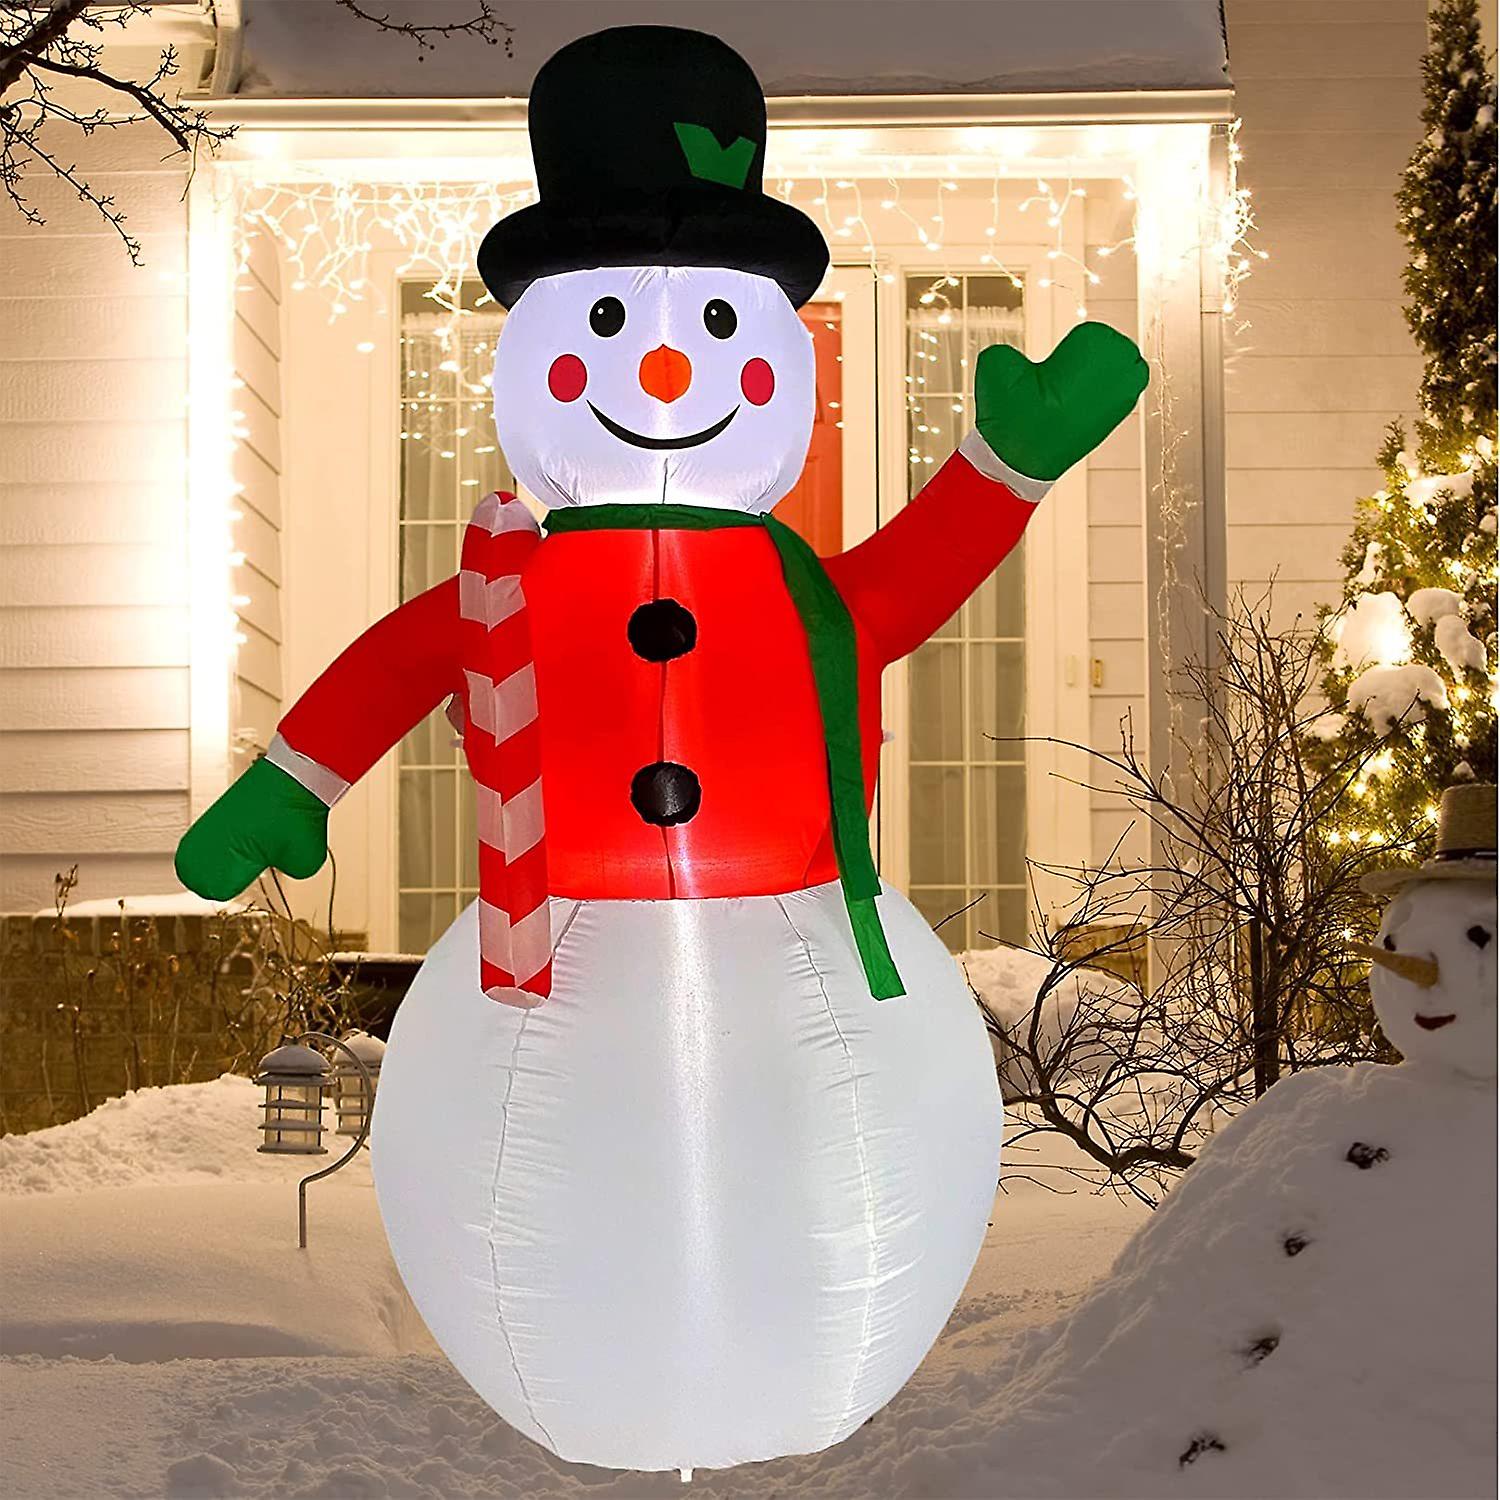 Inflatable Christmas Yard Decorations 8ft Snowman Blow Up Outdoor Decoration With Built-in Led Light For Indoor Outdoor Party Holiday Xmas Garden Lawn